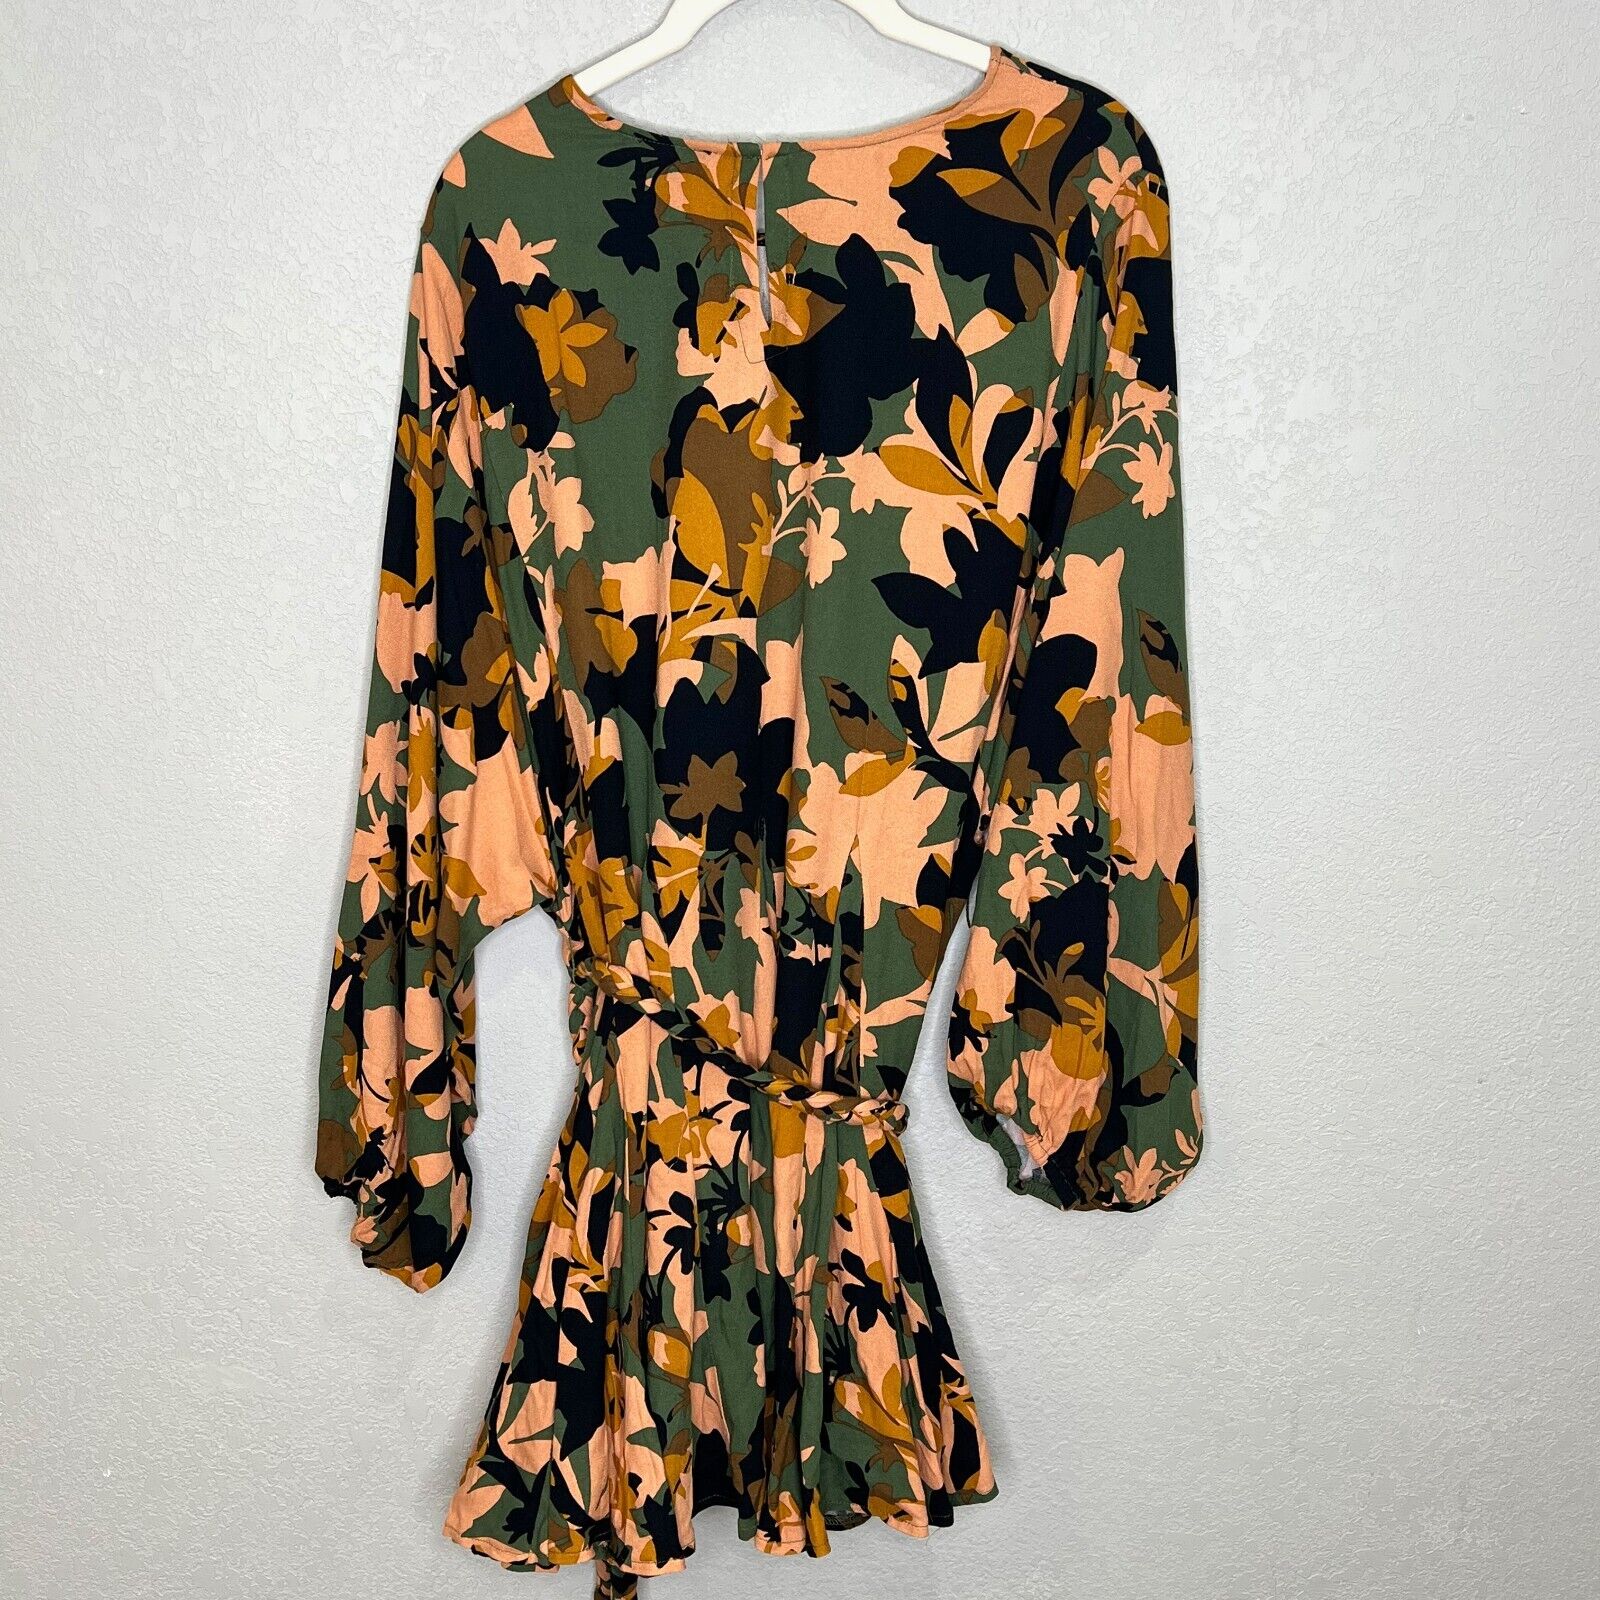 Vici Simba Floral Rope Tie Ruffle Dress Size XS / Small